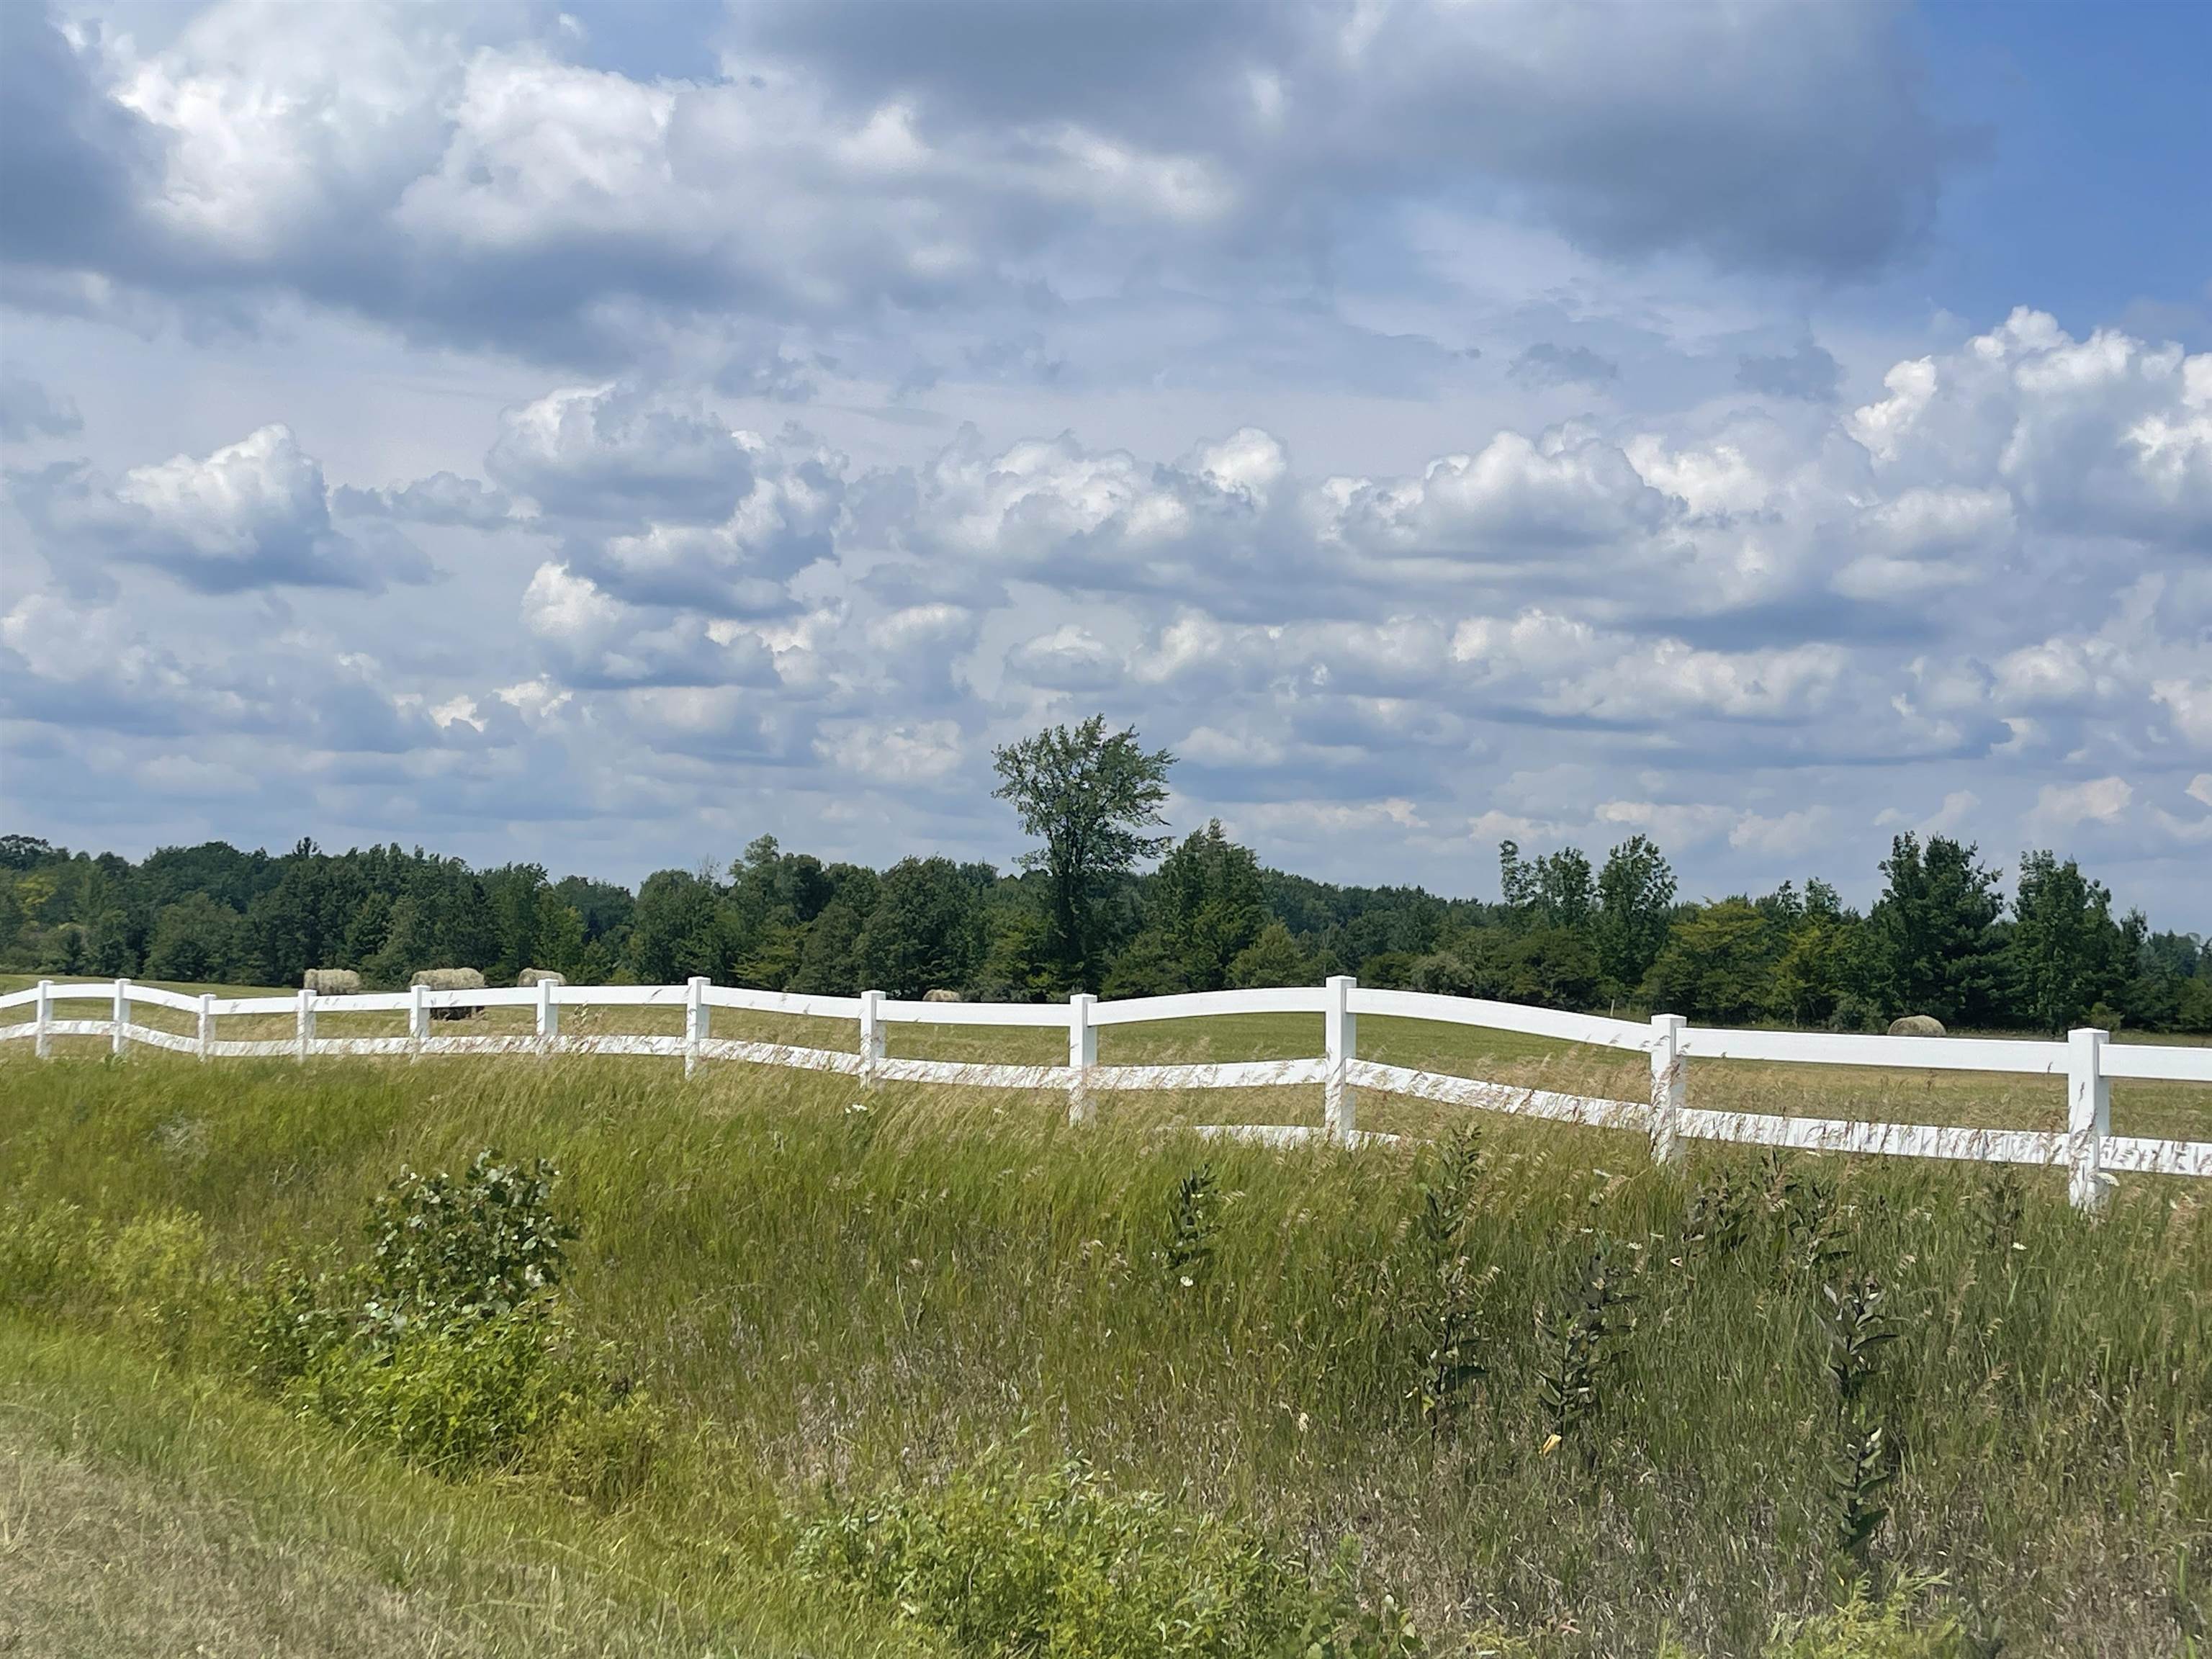 9.44 Acres with a lot of potential.  Includes approval for 4'x20' ft dock which can be put on inlet between Lots 9 and 10 for Lake Lancer access.  Electric and sewer available at road.  Perfect for  building.  Restrictions allow one pole barn 5000 SF or two pole barns at 2500 SF each. Property can be split once after purchase. A Bonus lot, which can be purchase separately (2045 Heather Way) backs up to Lot 1 giving you membership rights to Sugar Springs and its amenities.  Lot 1 is on North Side of Willow Bay along white fencing.